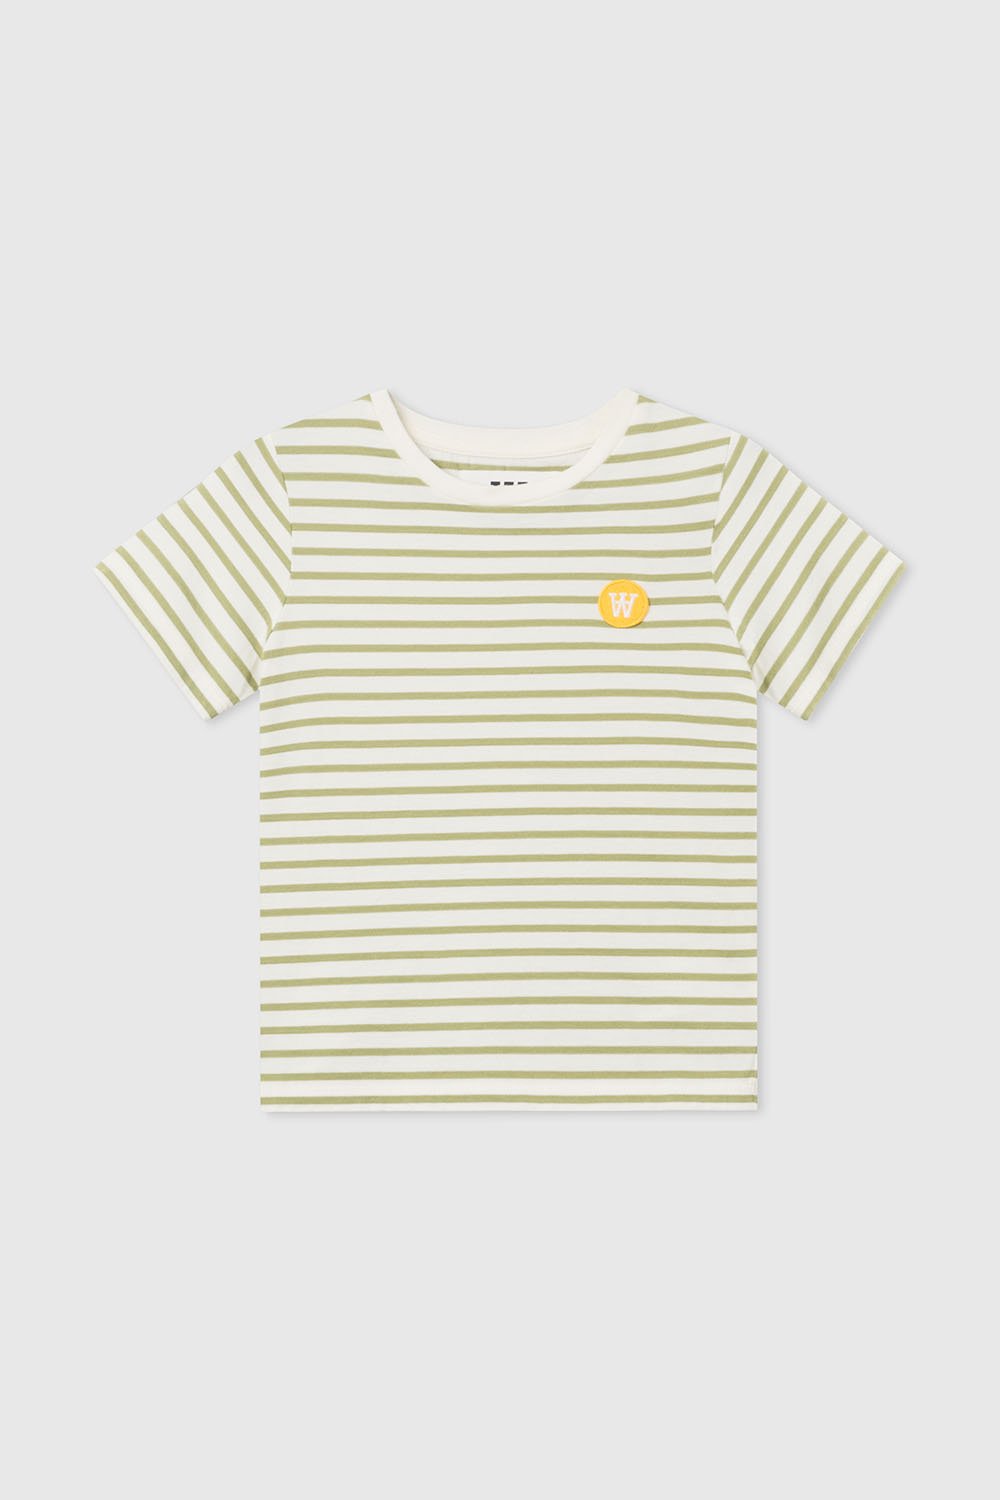 Double A by Wood Wood Ola kids T-shirt Off-white/olive stripes ...